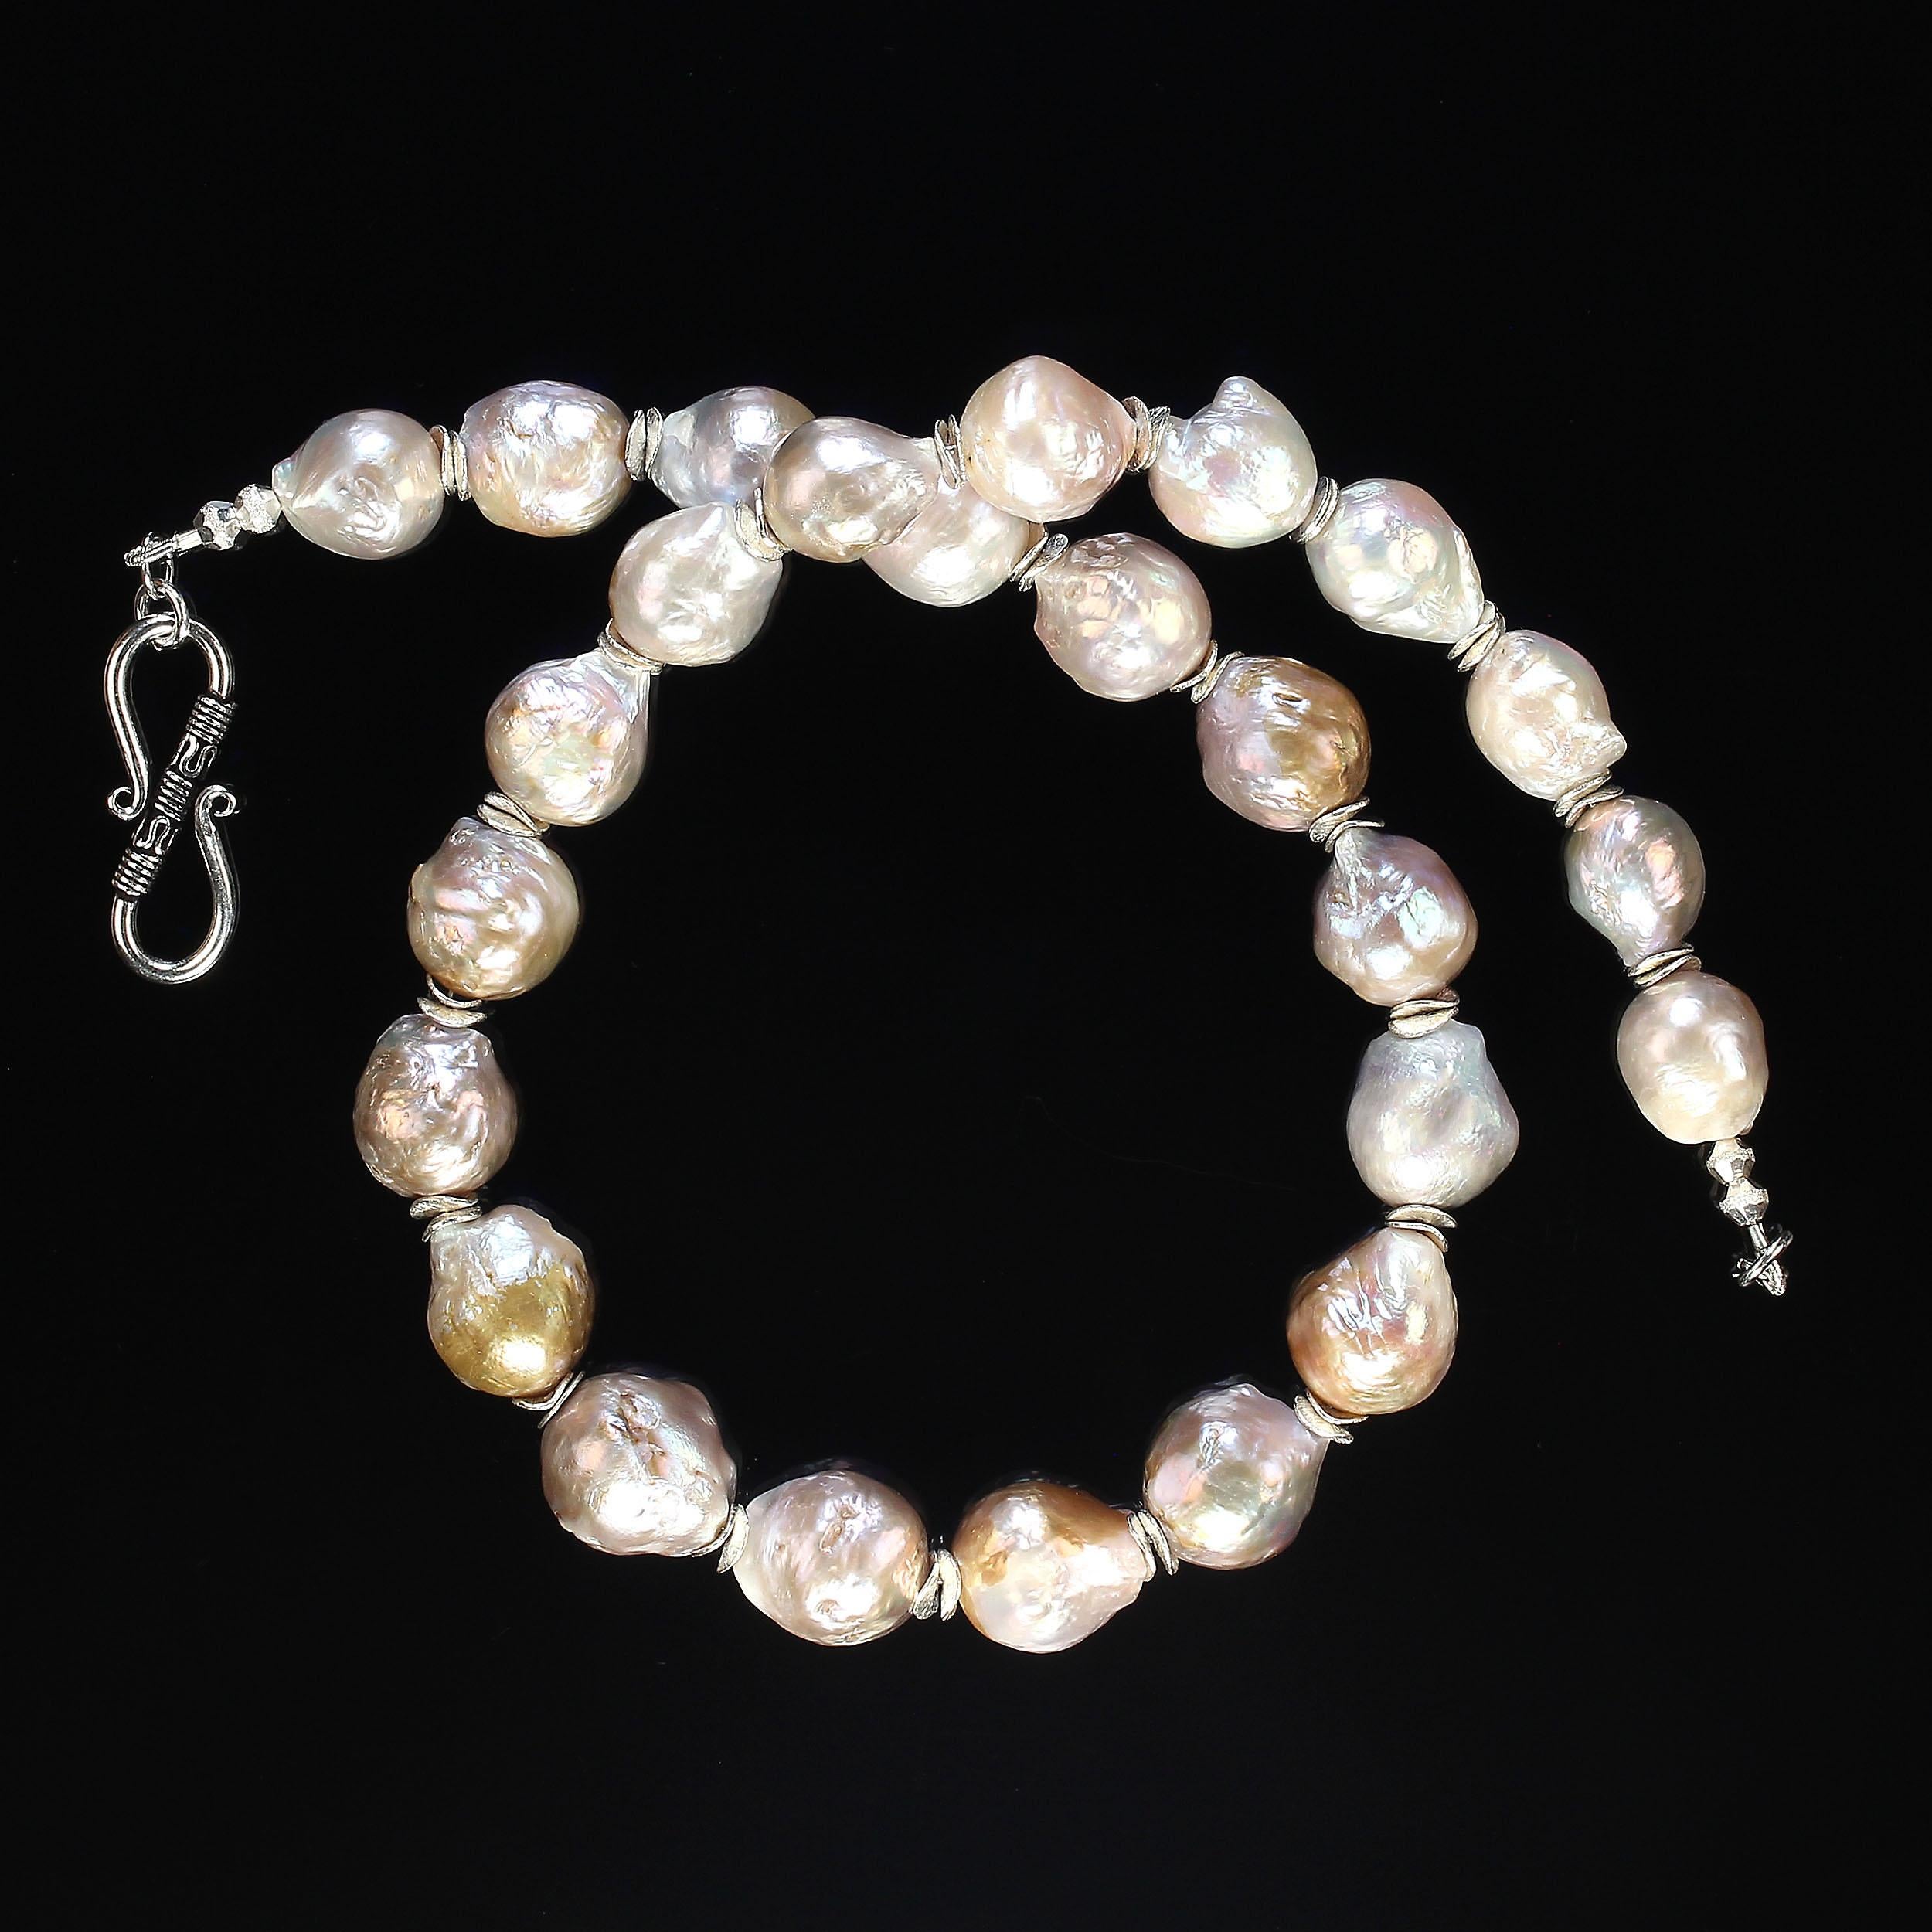 Bead AJD 19 Inch Baroque Iridescent Silvery Pearls with silvery accents Perfect Gift! For Sale